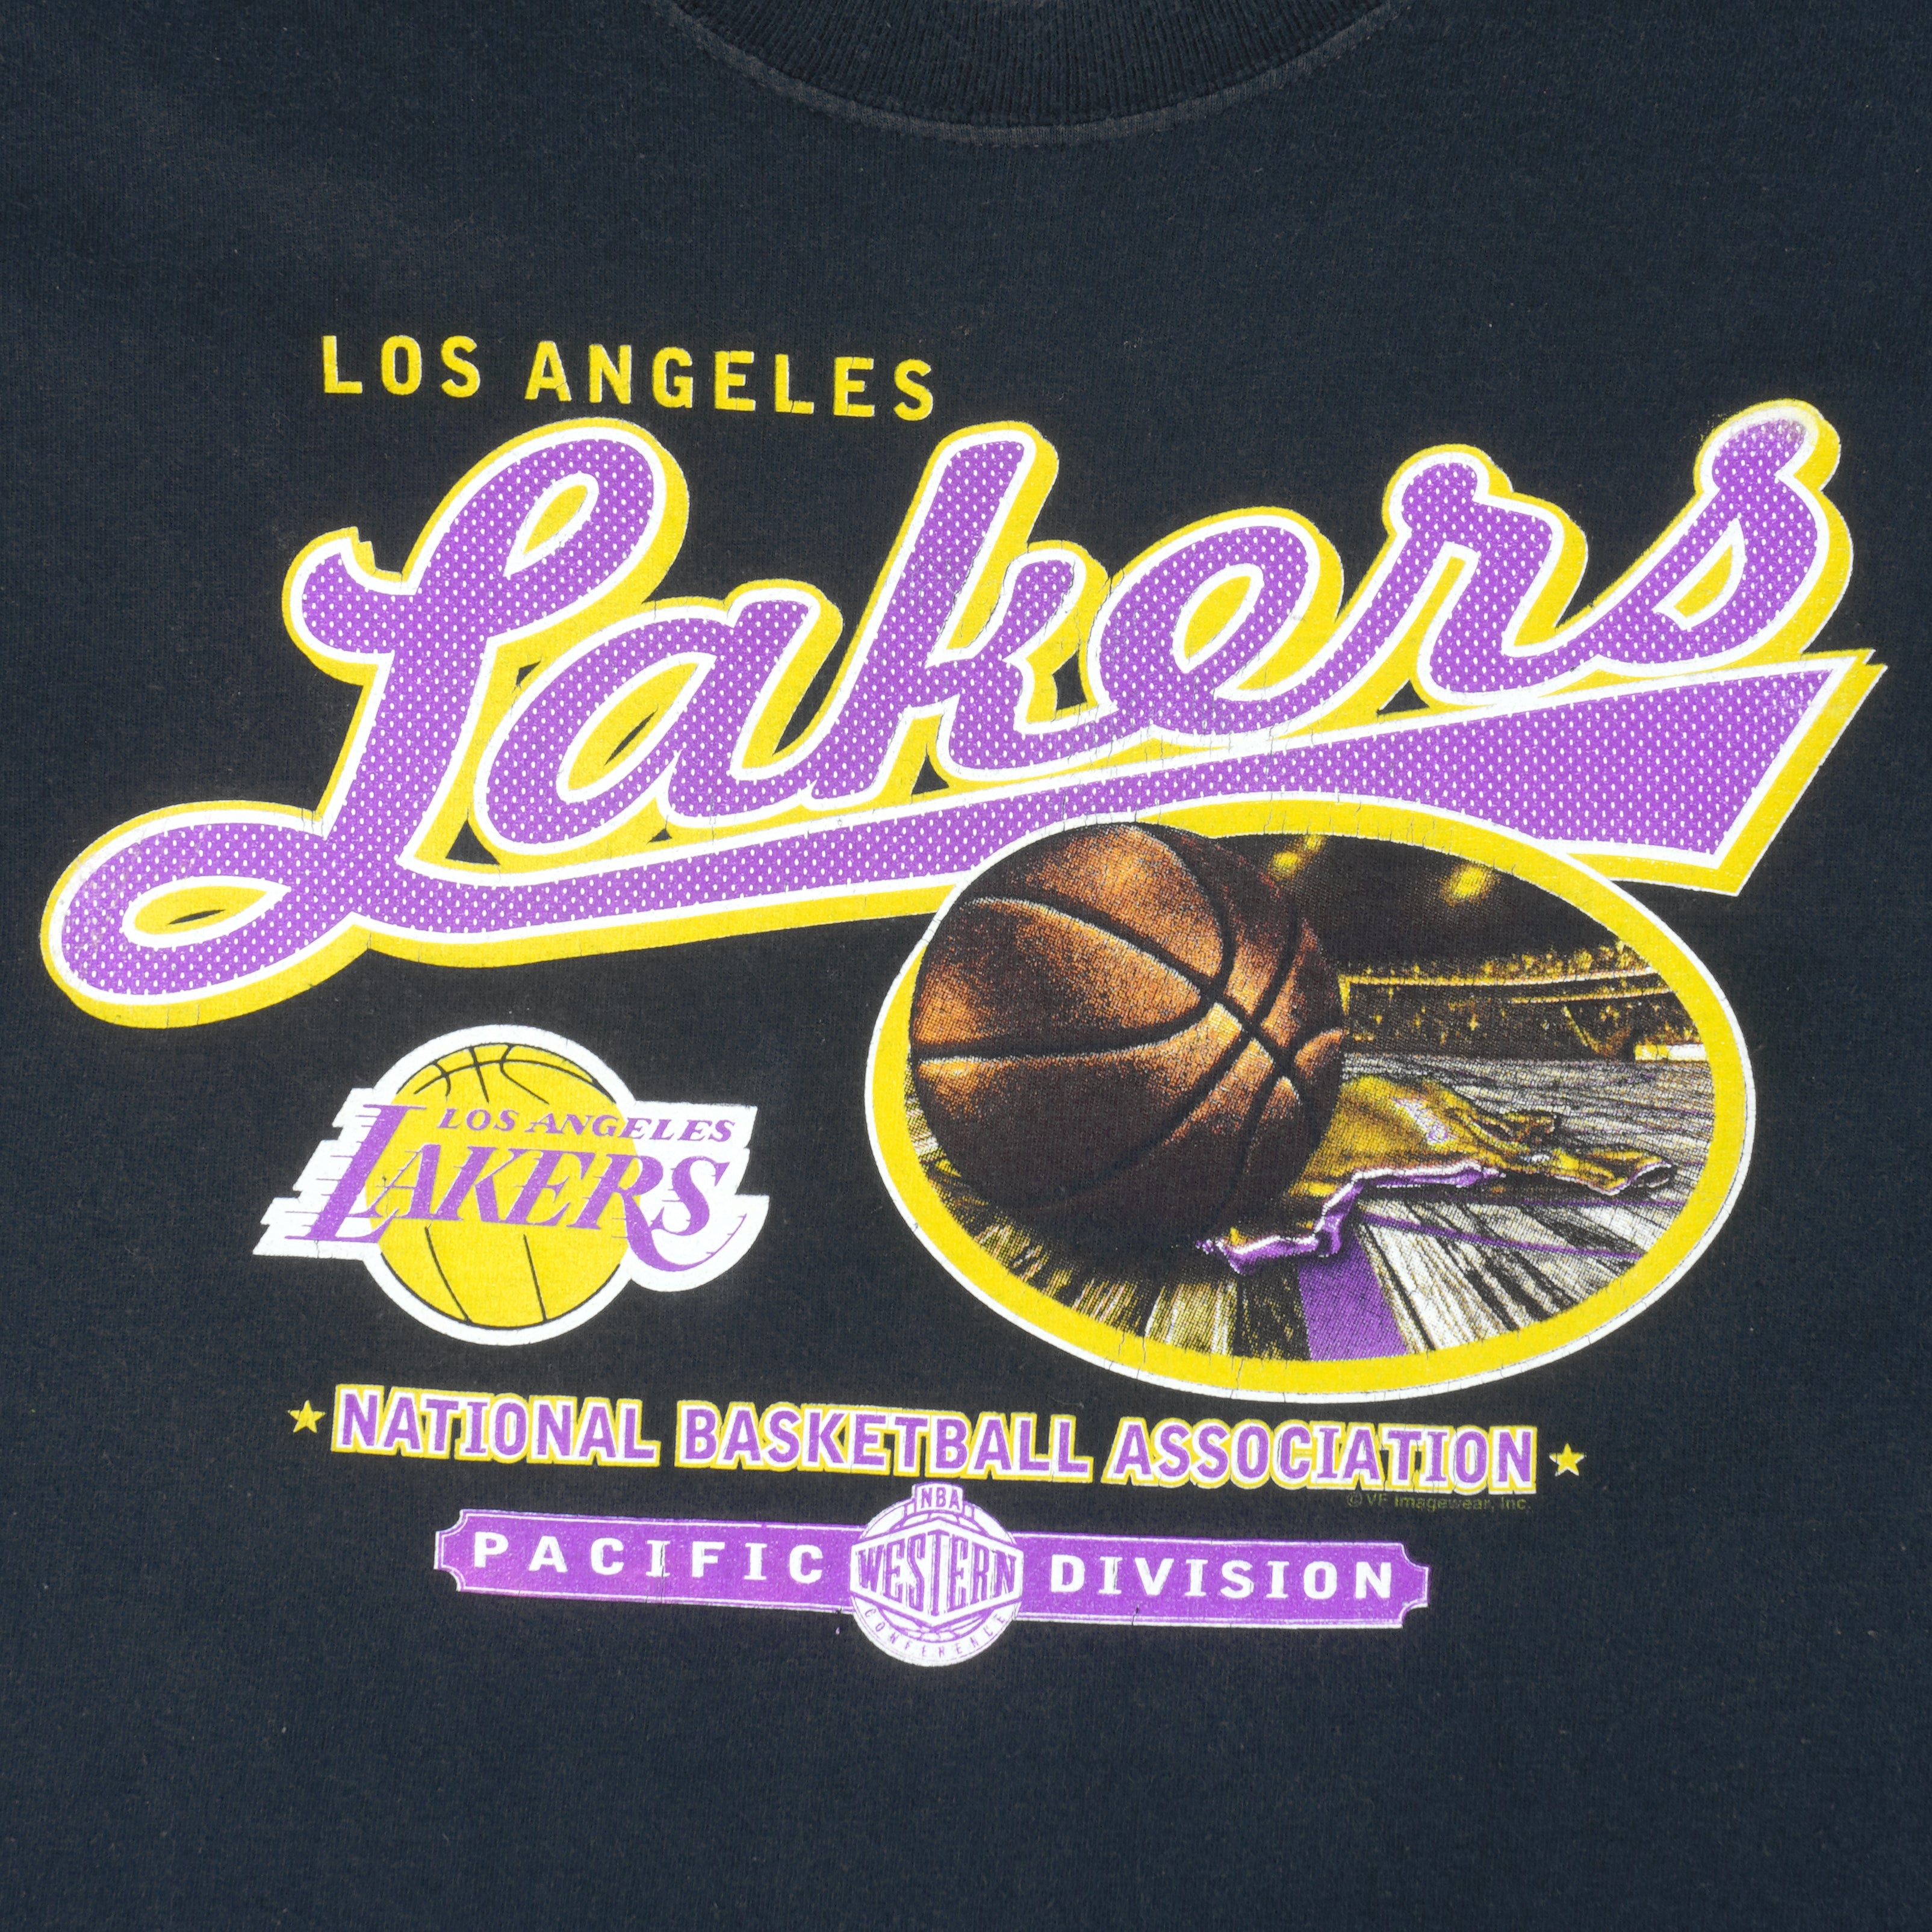 Vintage NBA Los Angeles Lakers Sweatshirt 1991 Size Large Made in USA